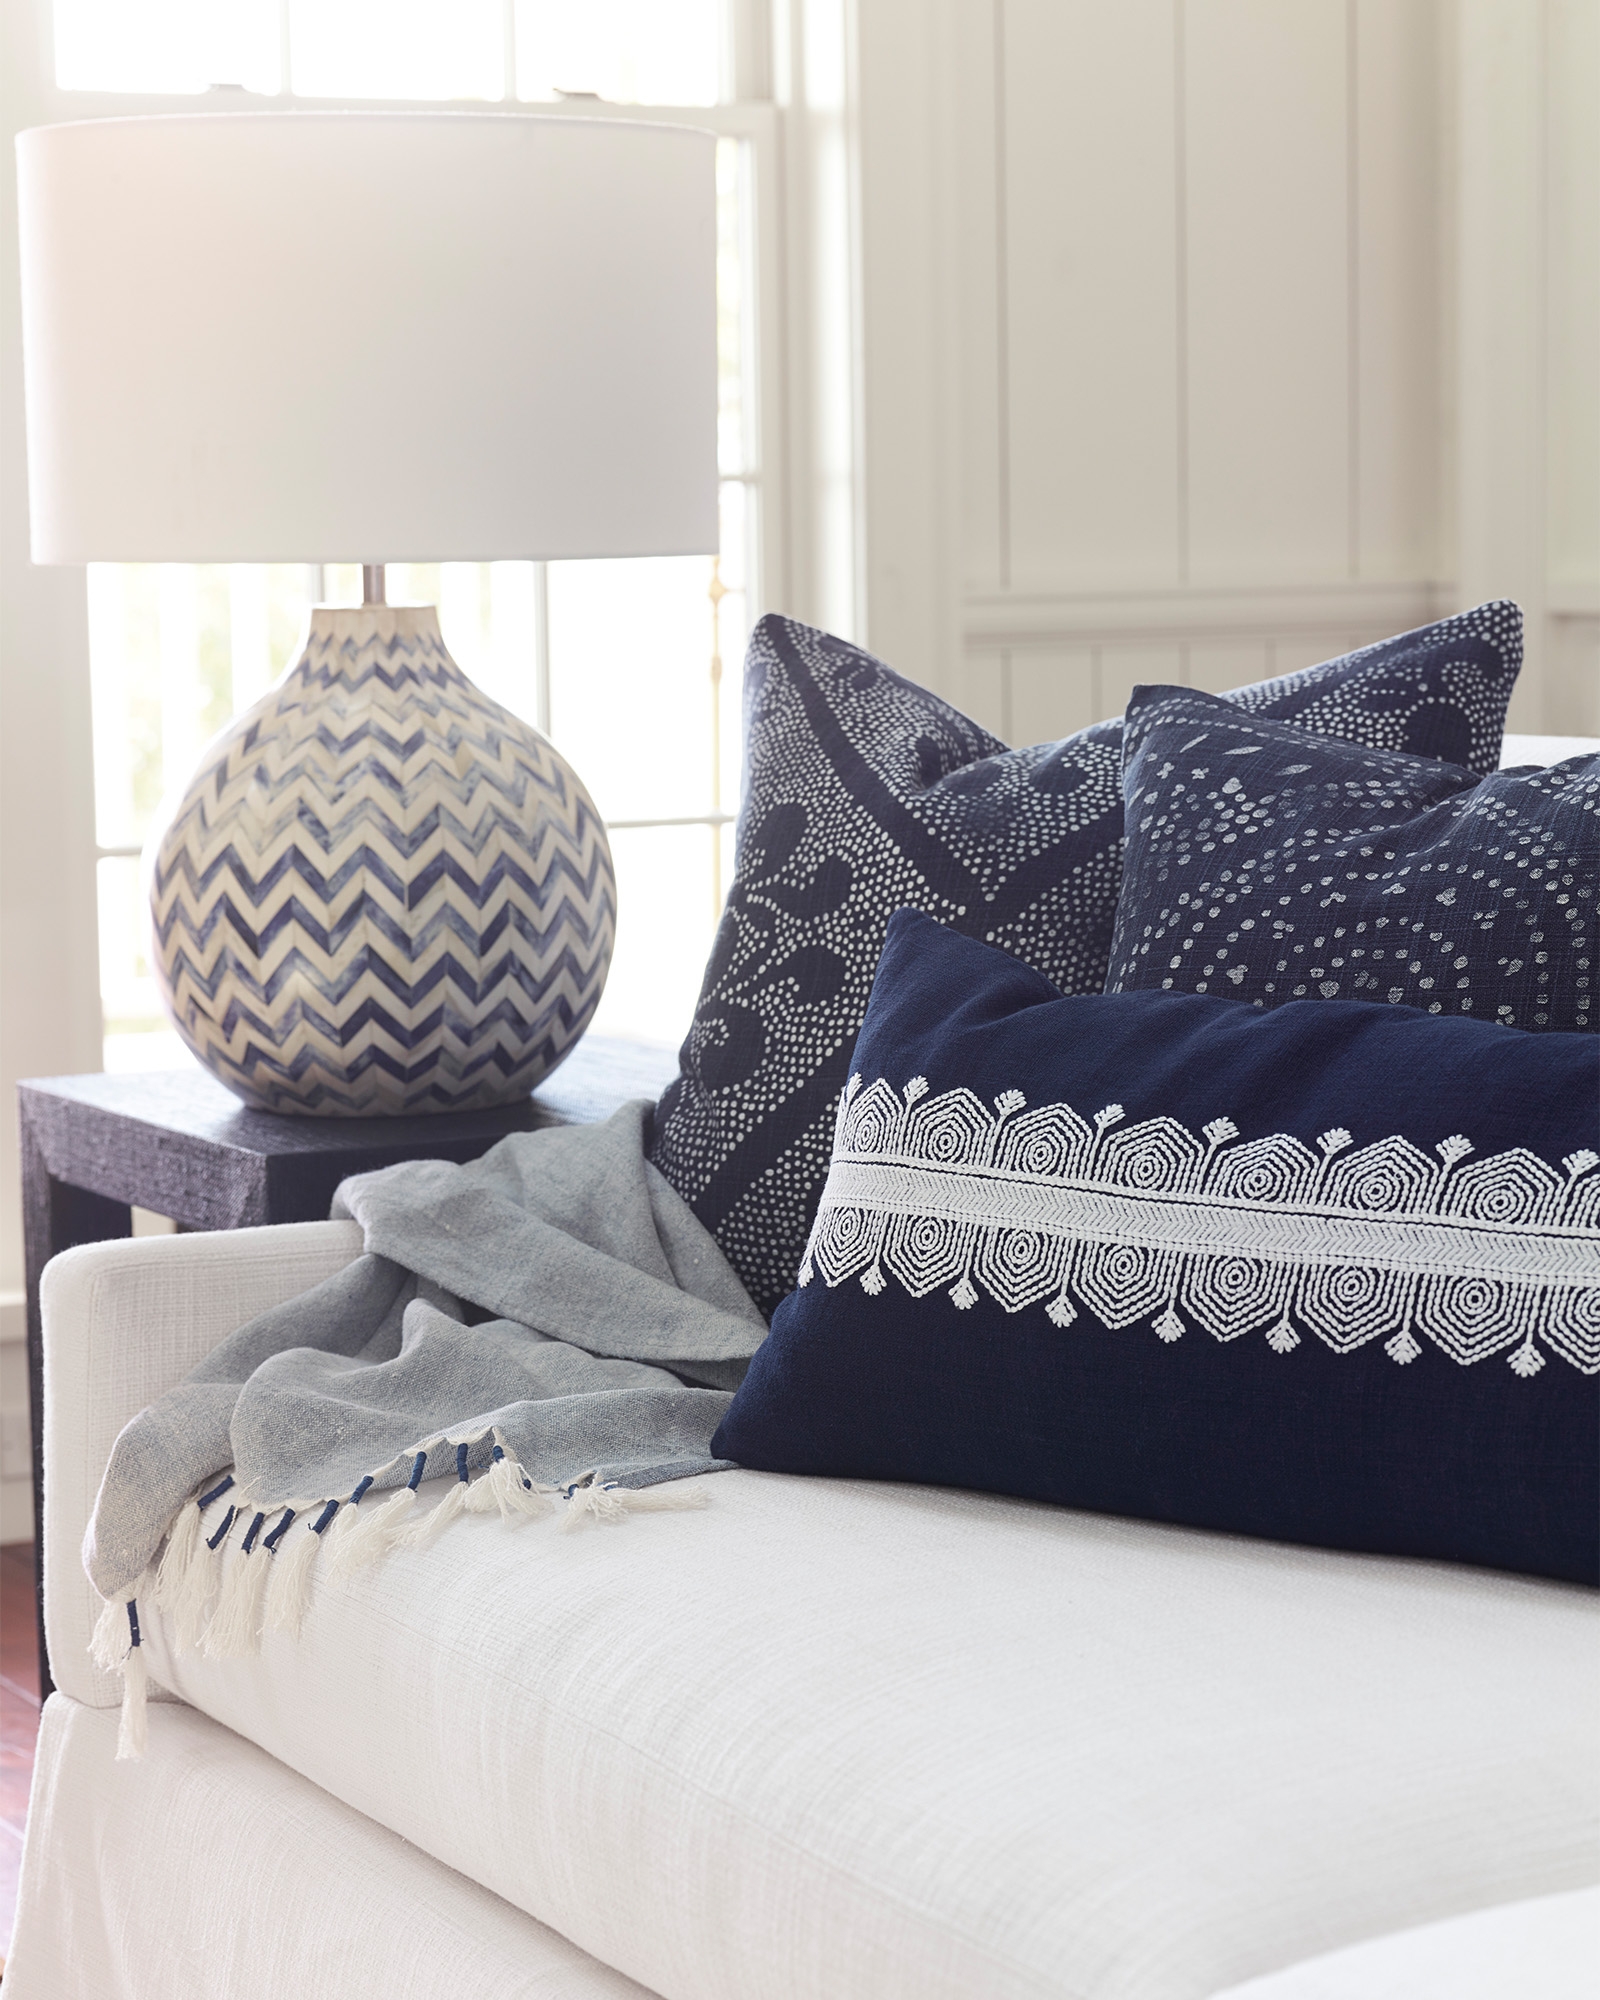 Olympia 14" x 30" Pillow Cover - Navy - Insert sold separately - Image 2